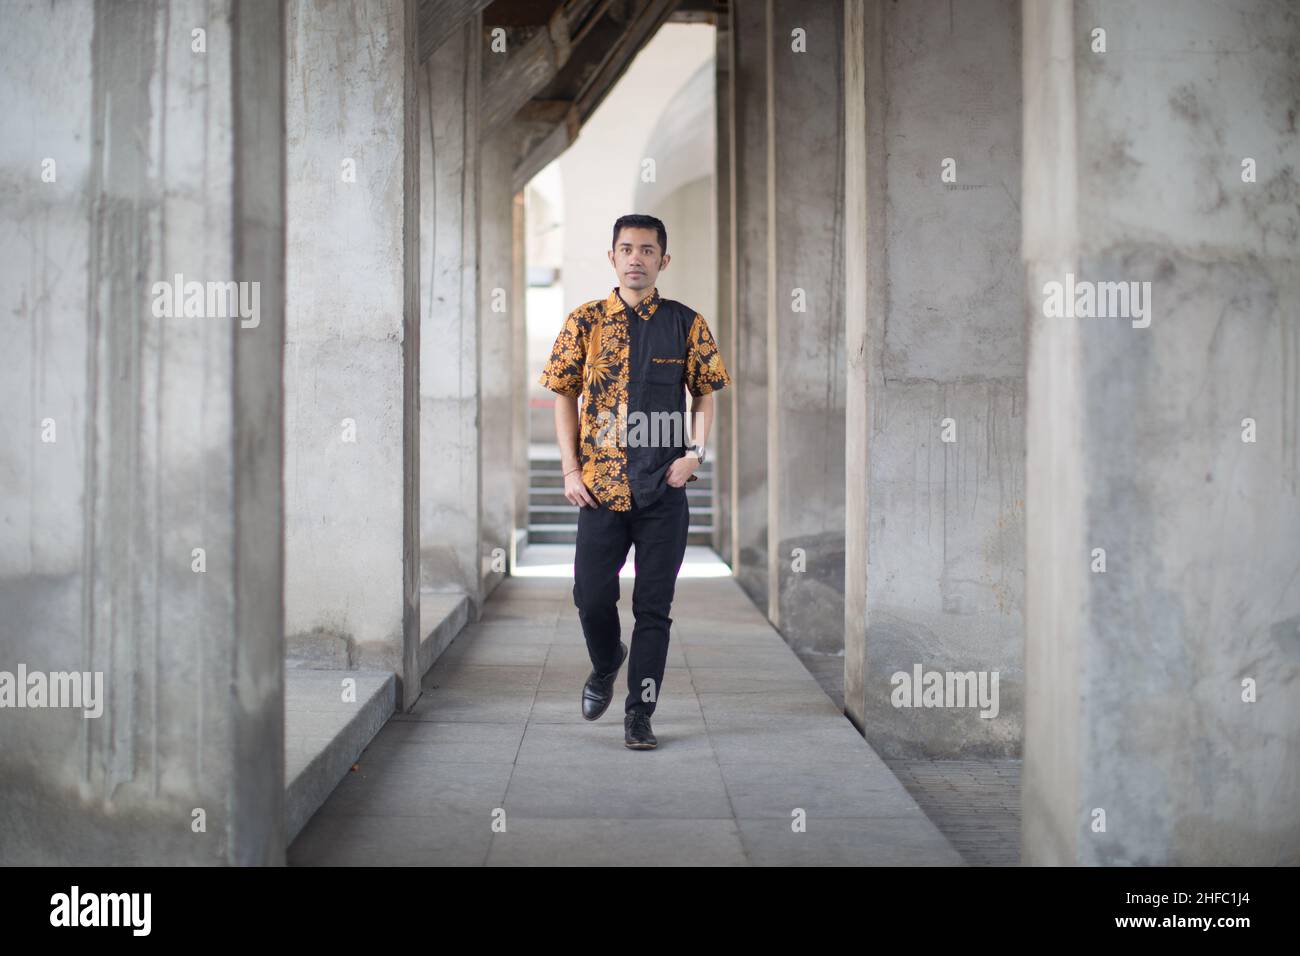 A young male model dressed in Indonesian Batik is posing among rows of pillars at the Long Museum, West Bund, Shanghai China Stock Photo